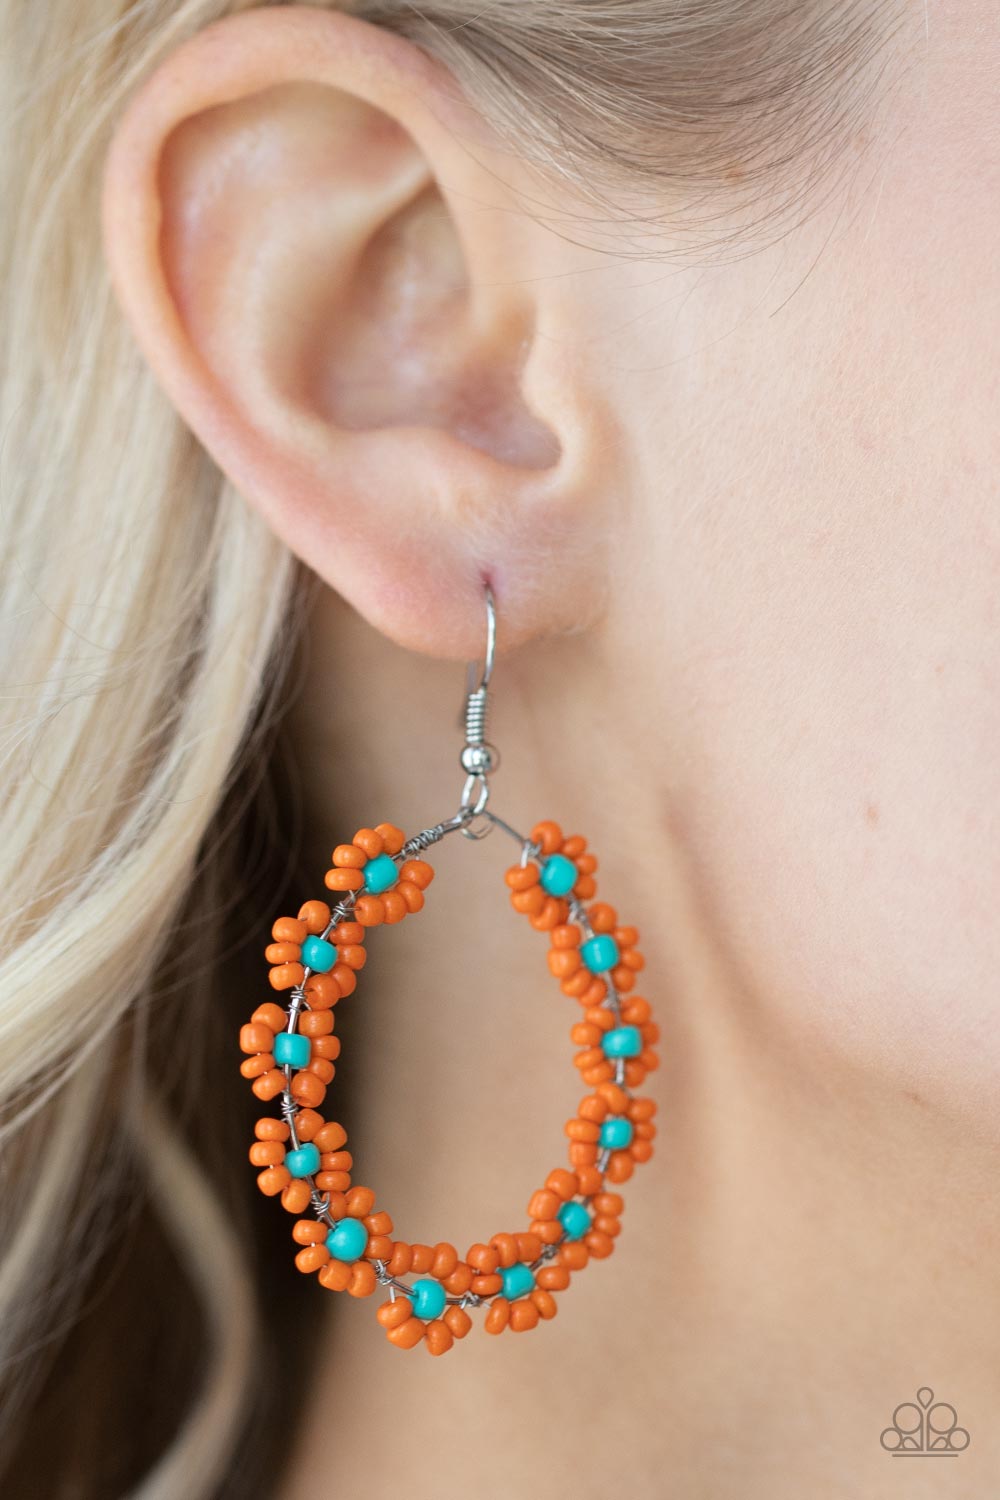 Festively Flower Child - Orange - Blue Seed Bead Earrings - Paparazzi Accessories - Dotted with turquoise beaded centers, a dainty collection of orange seed beaded floral frames are threaded along a wire hoop for a fabulous floral fashion. Earring attaches to a standard fishhook fitting. 